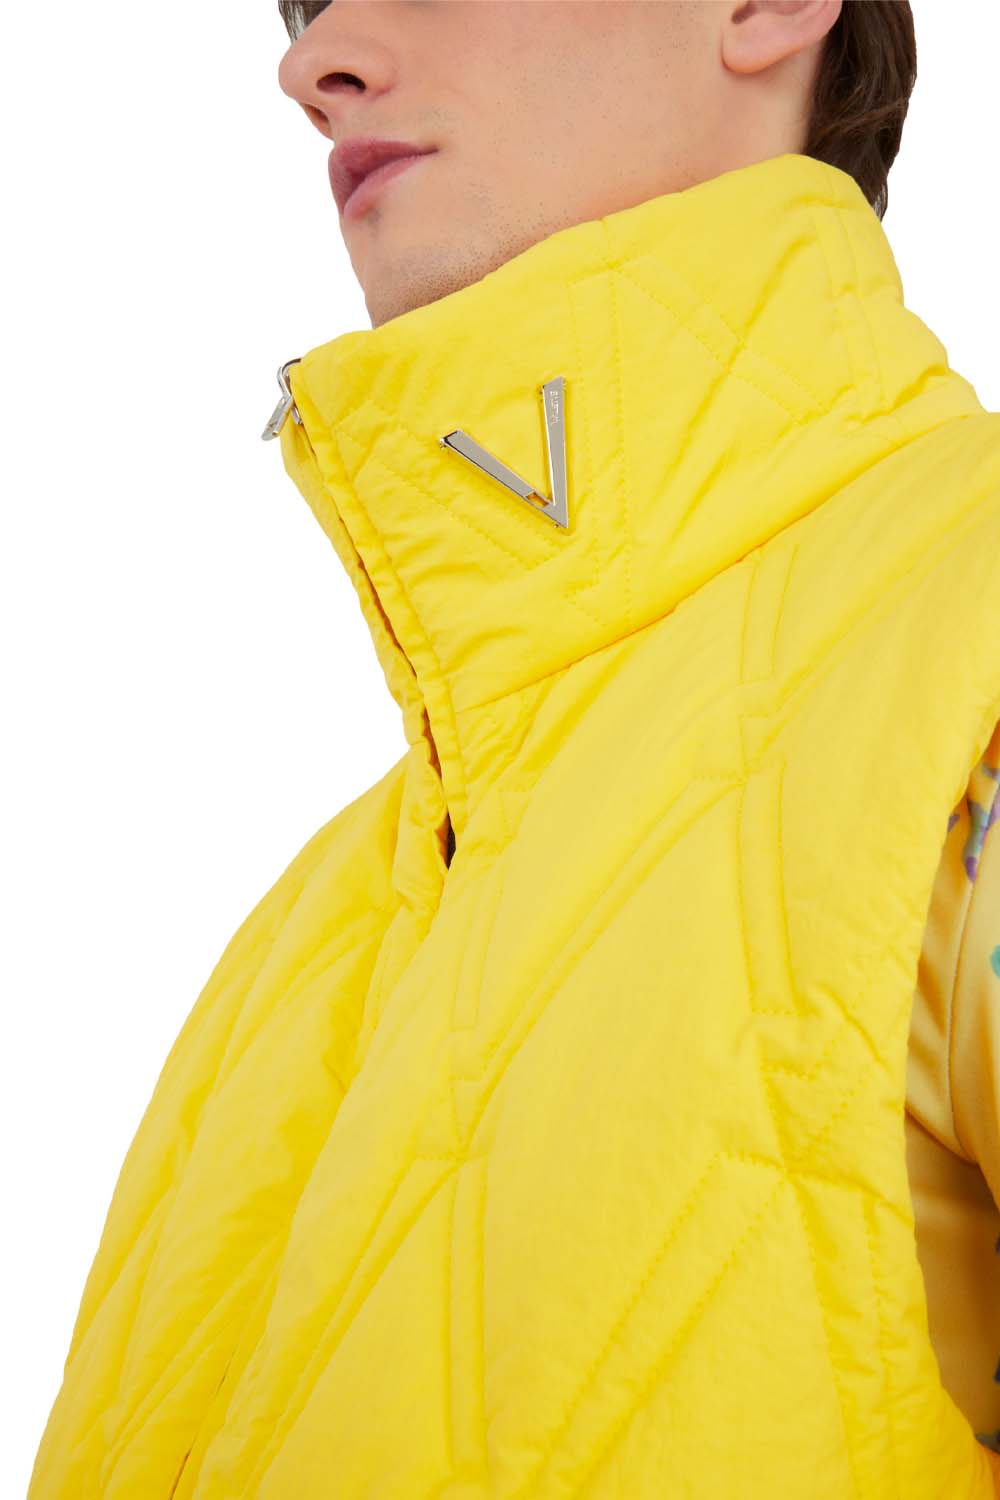 Valette Studio - The Quilted Vest: Yellow